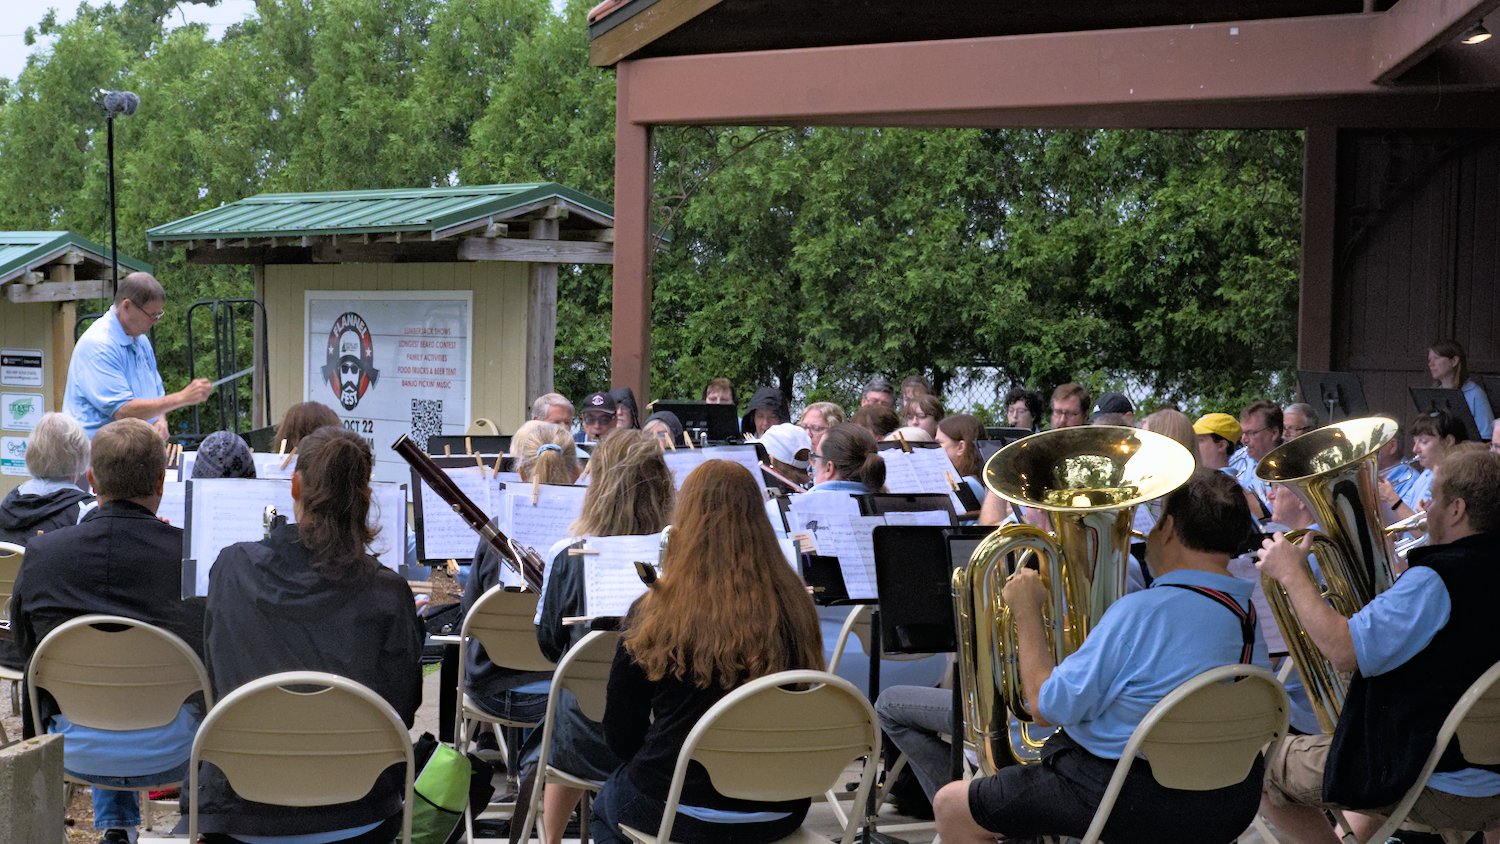 Crystal Lake Community Band performing in the drizzle.